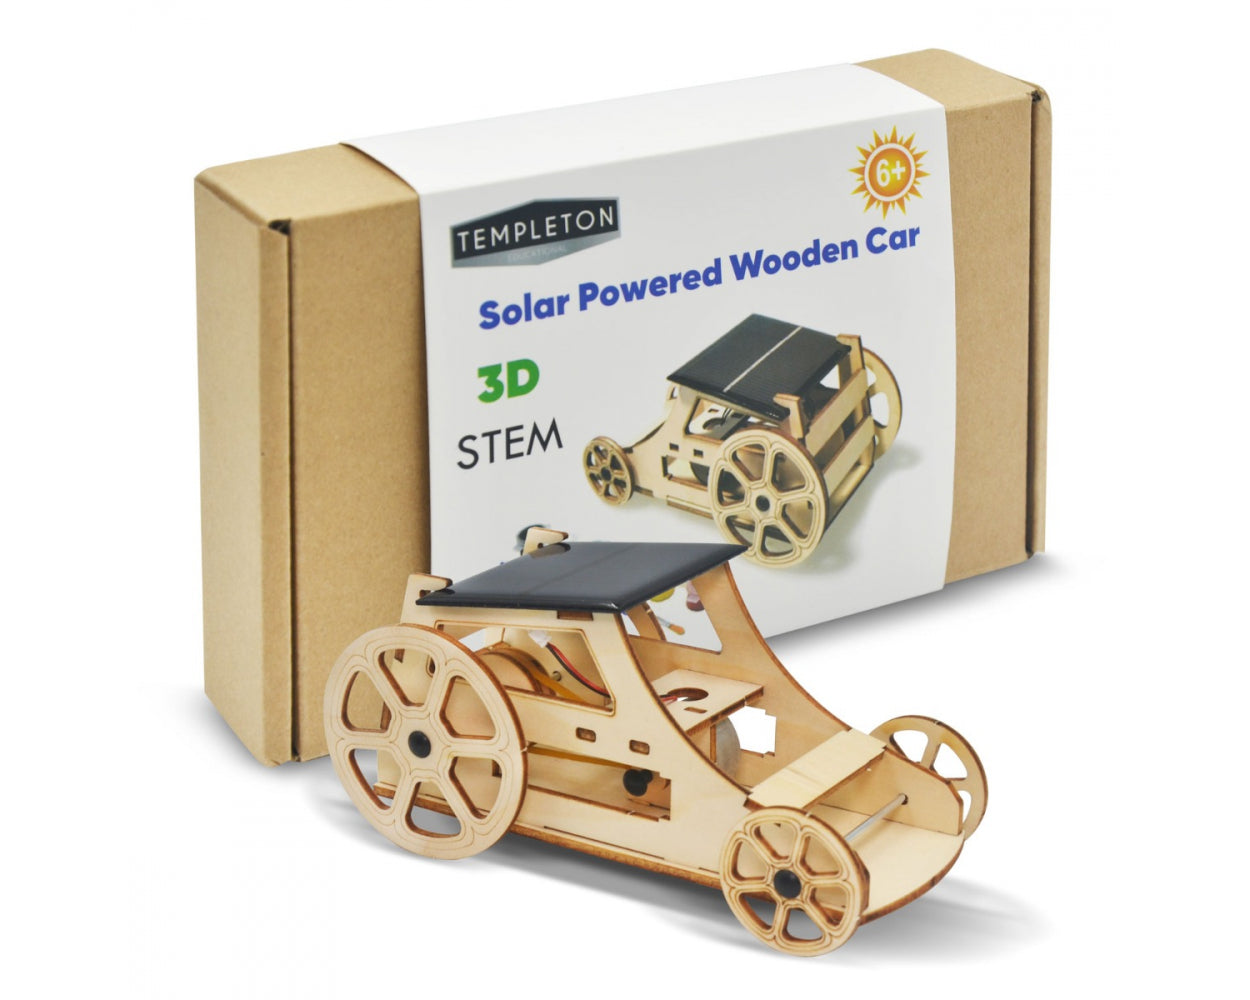 Smartstoy Wooden Solar Car Stem Projects for Kids - Science Kits for Boys & Girls Model Kits to Build - DIY Educational Building toys-c